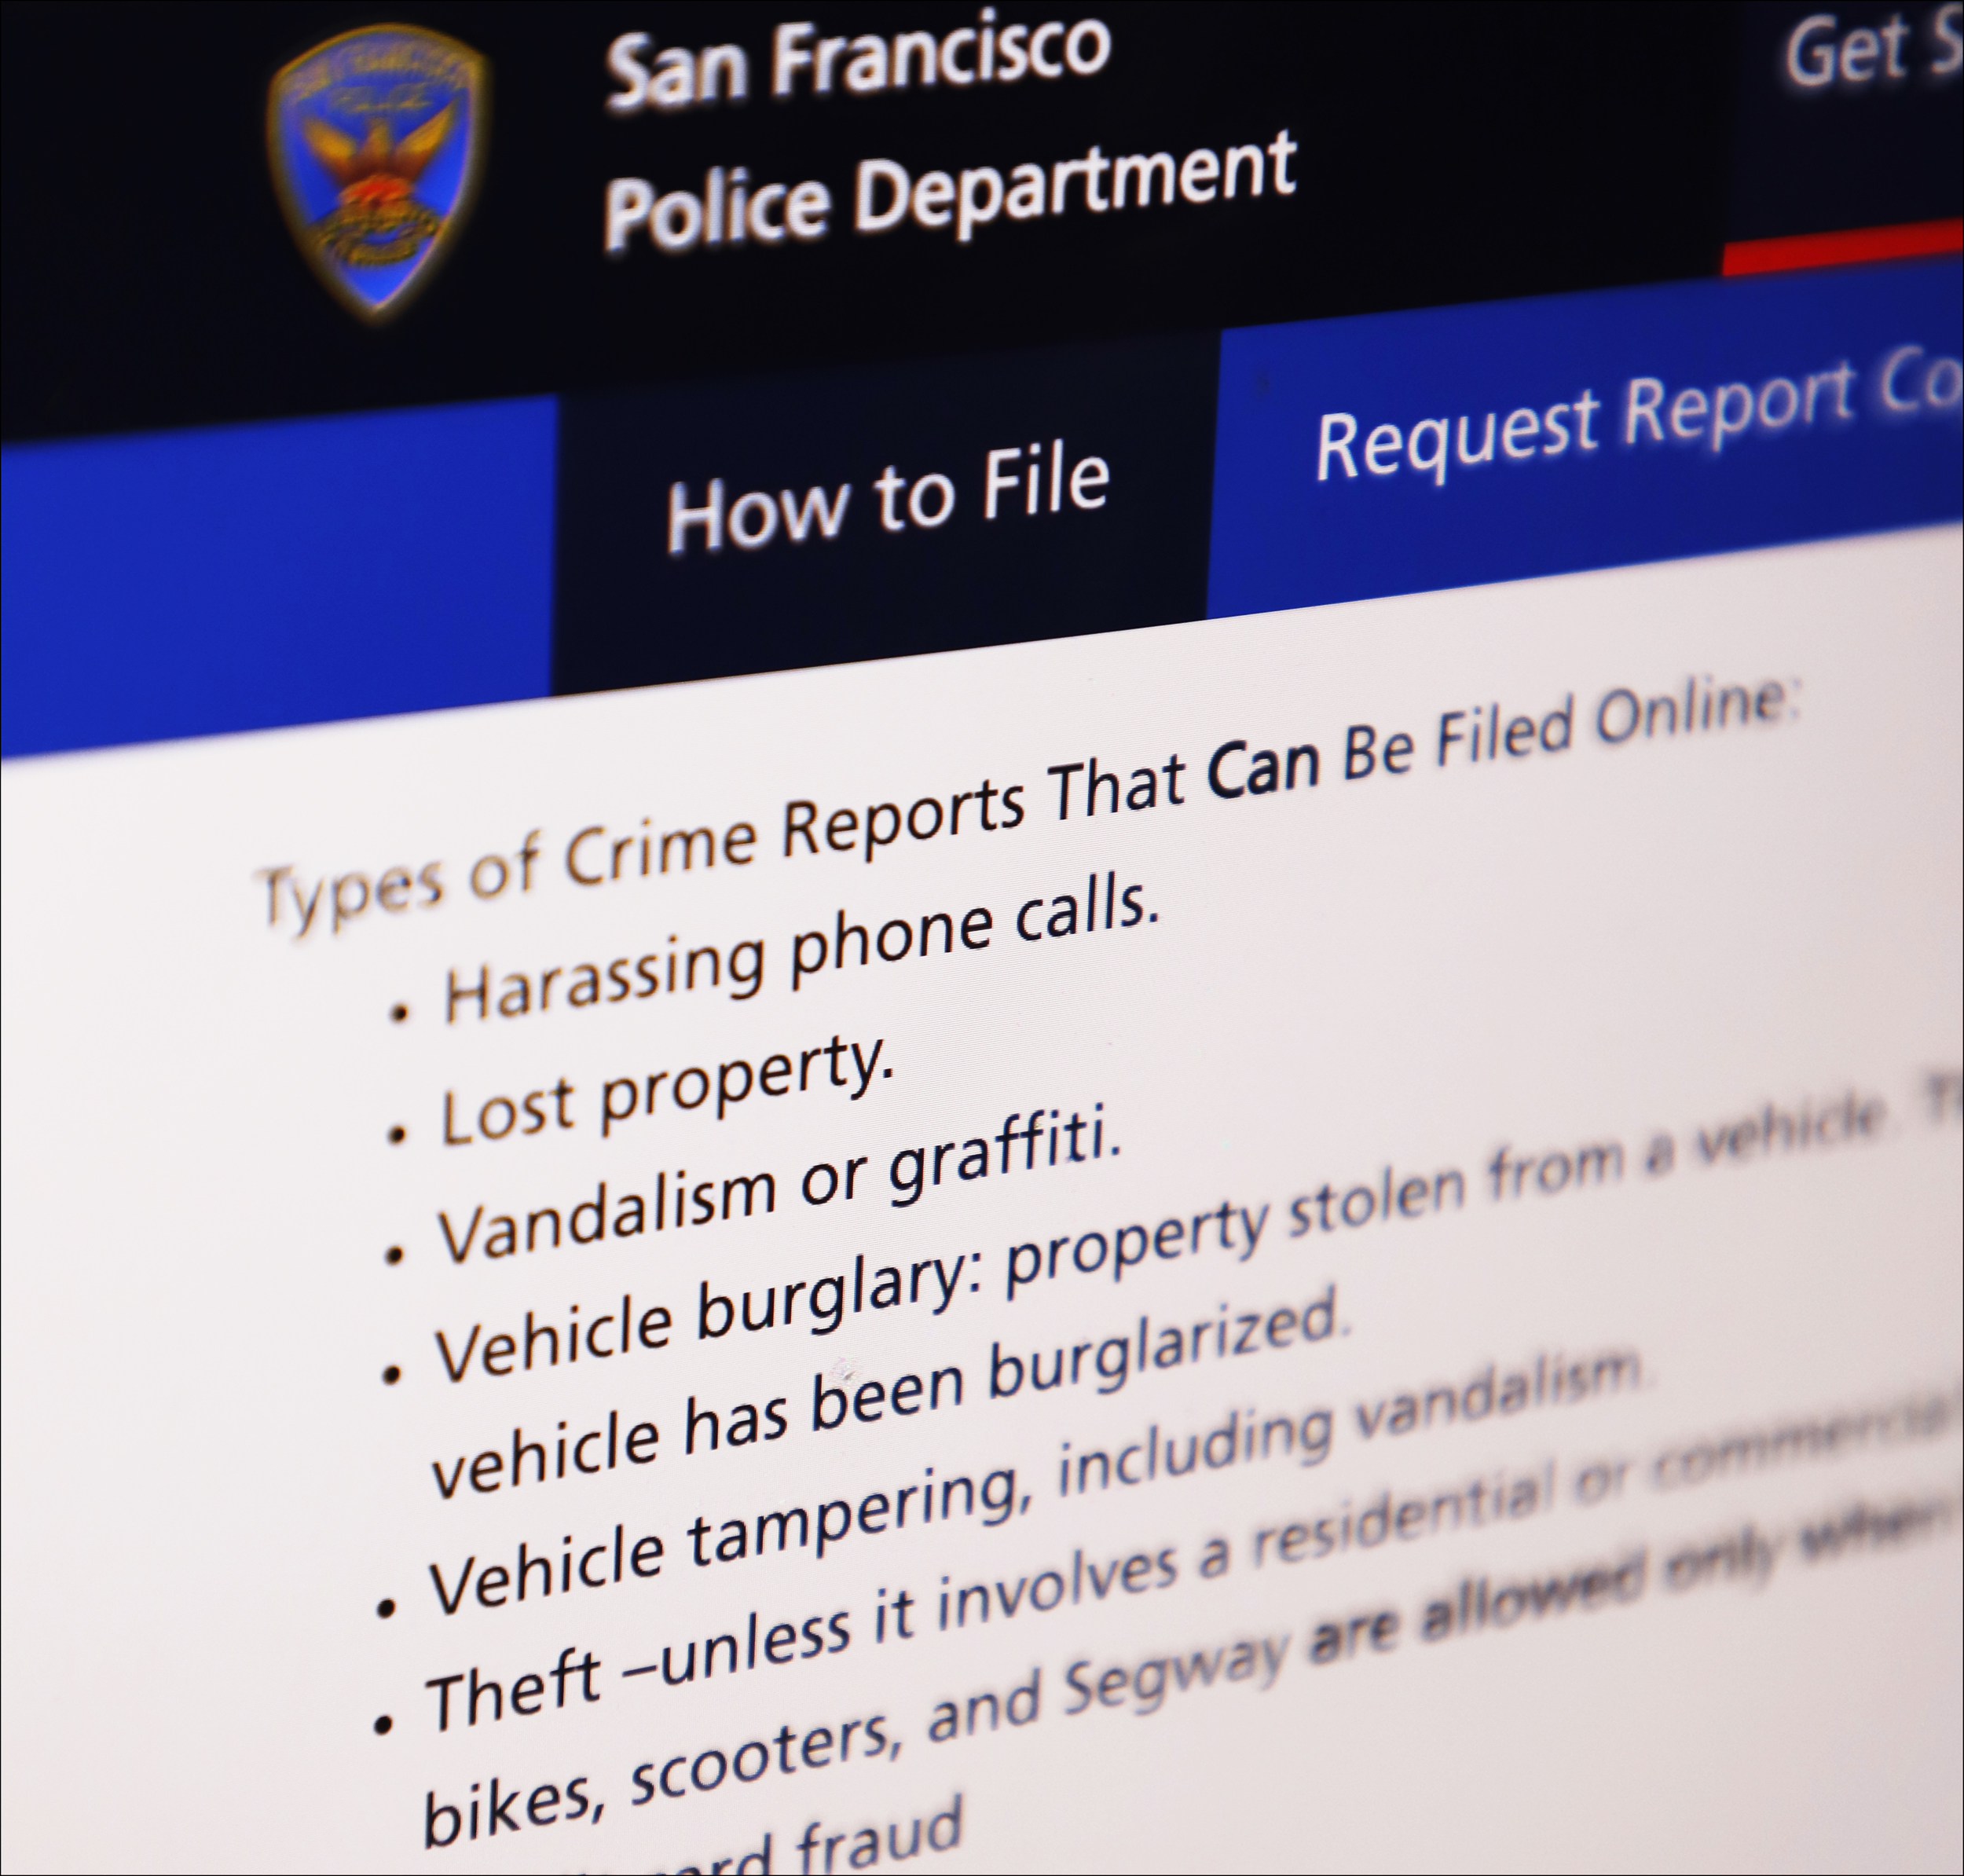 The image displays a webpage from the San Francisco Police Department detailing types of crime reports that can be filed online, such as harassing phone calls and lost property.